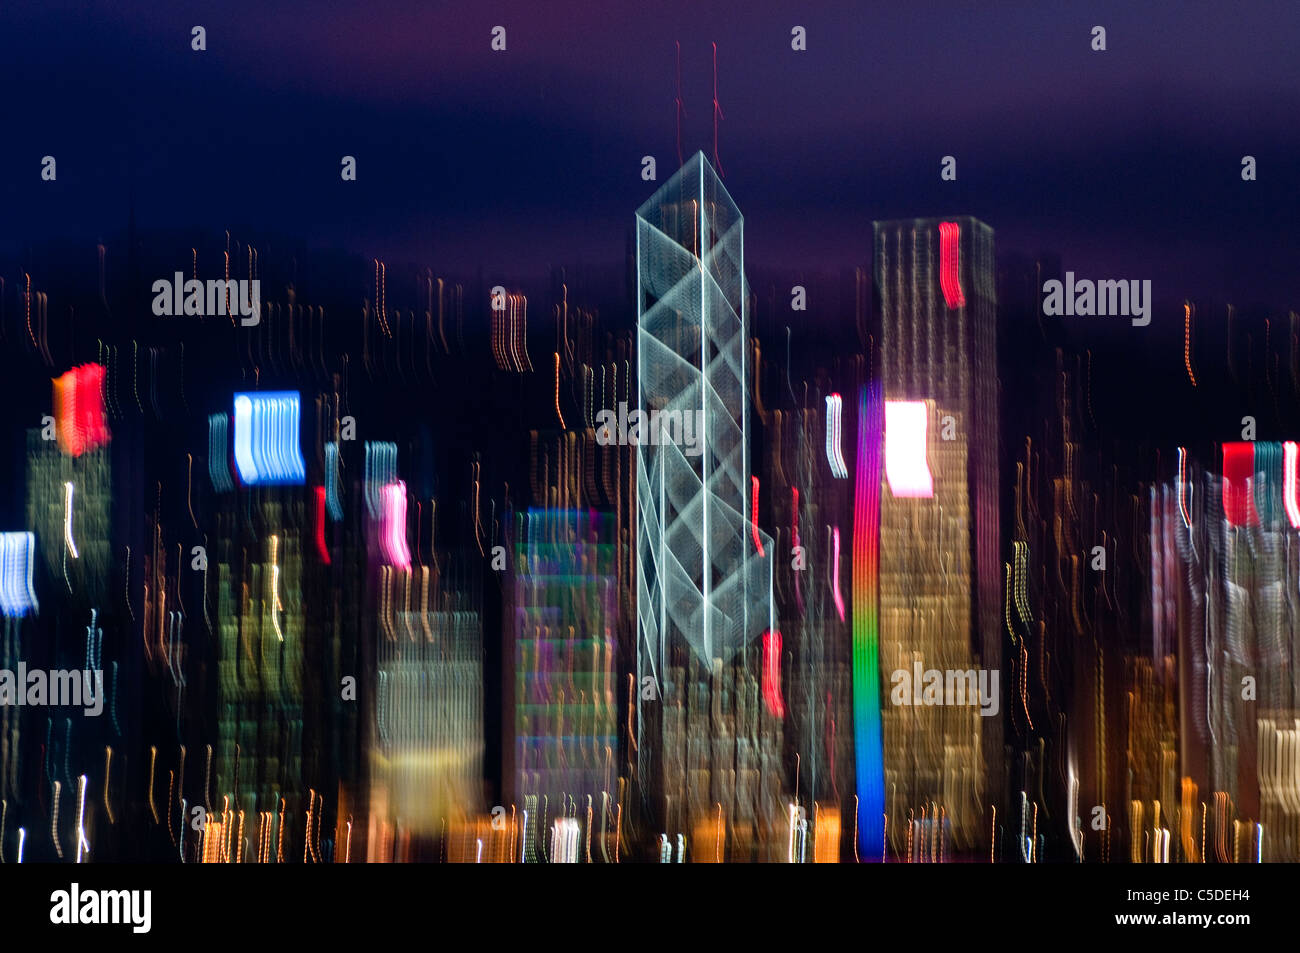 Hong Kong skyline at night with abstract blurred movement of lights Stock Photo